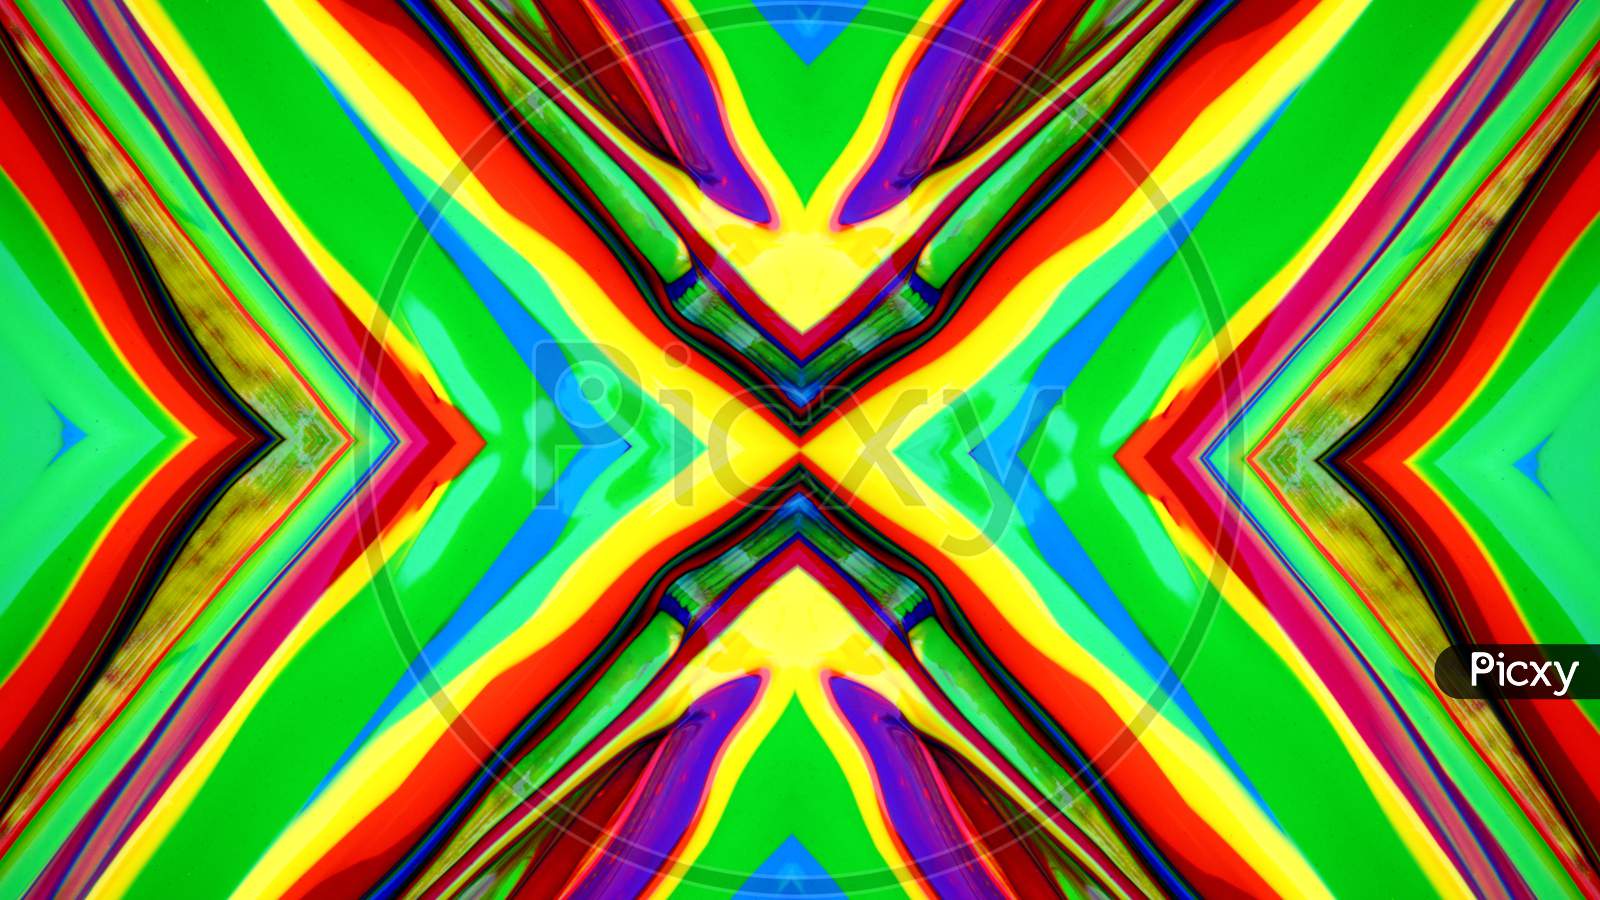 A creative colour full abstract design in creative background.